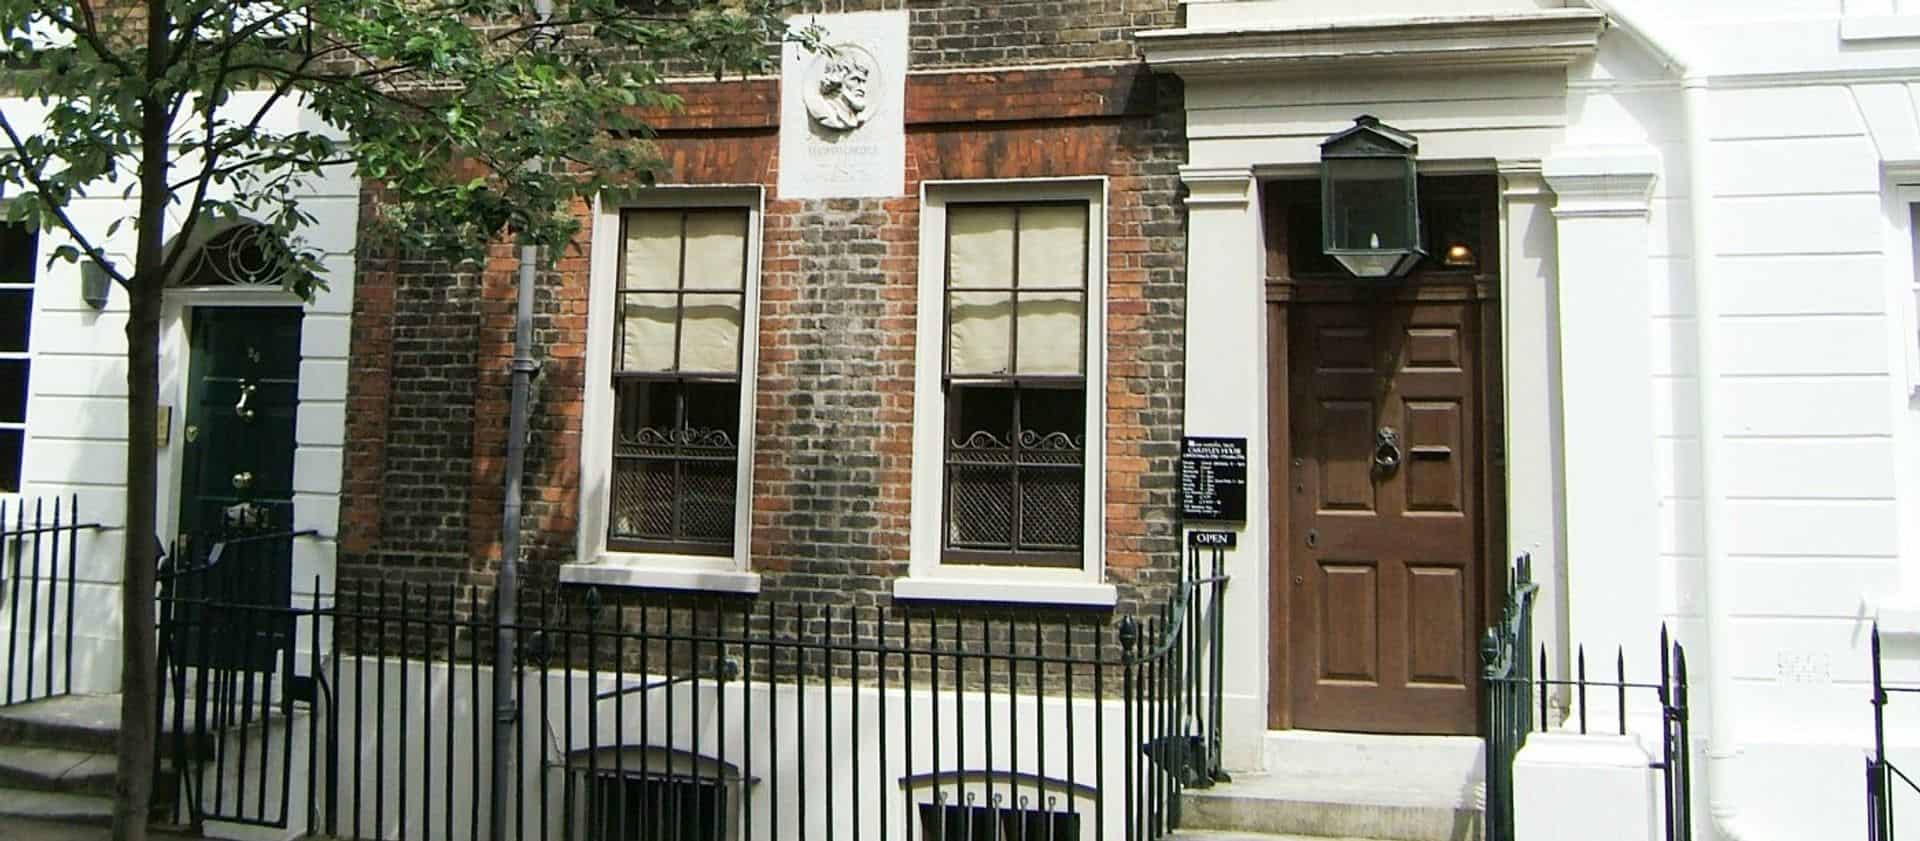 Carlyle's House in UK